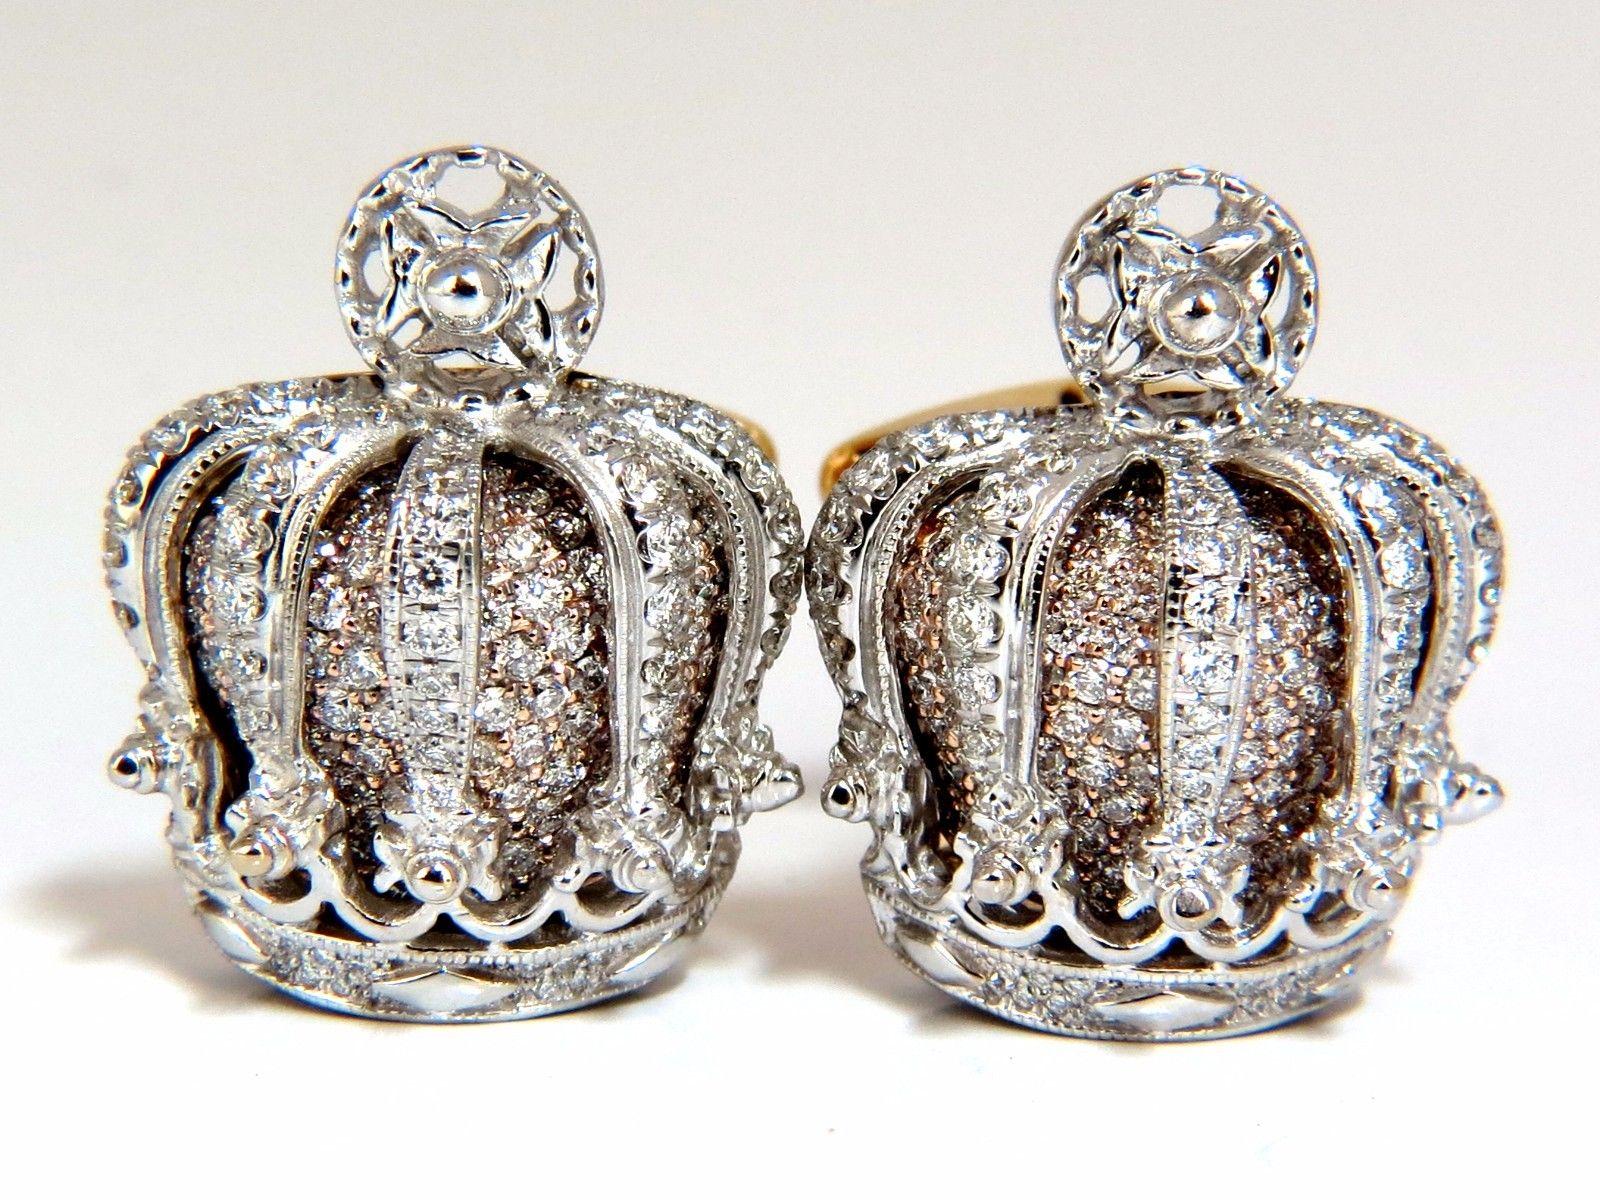 Posh Regal Britt.

Natural Diamonds Royal Crown Cufflinks.
3D details, composed of several layers.

Raised puff dome Crown shape


Mounted in the classical bead set,

French Pave form.


6.00ct. Rounds full cut brilliant diamonds.
F-G color

Vs-1